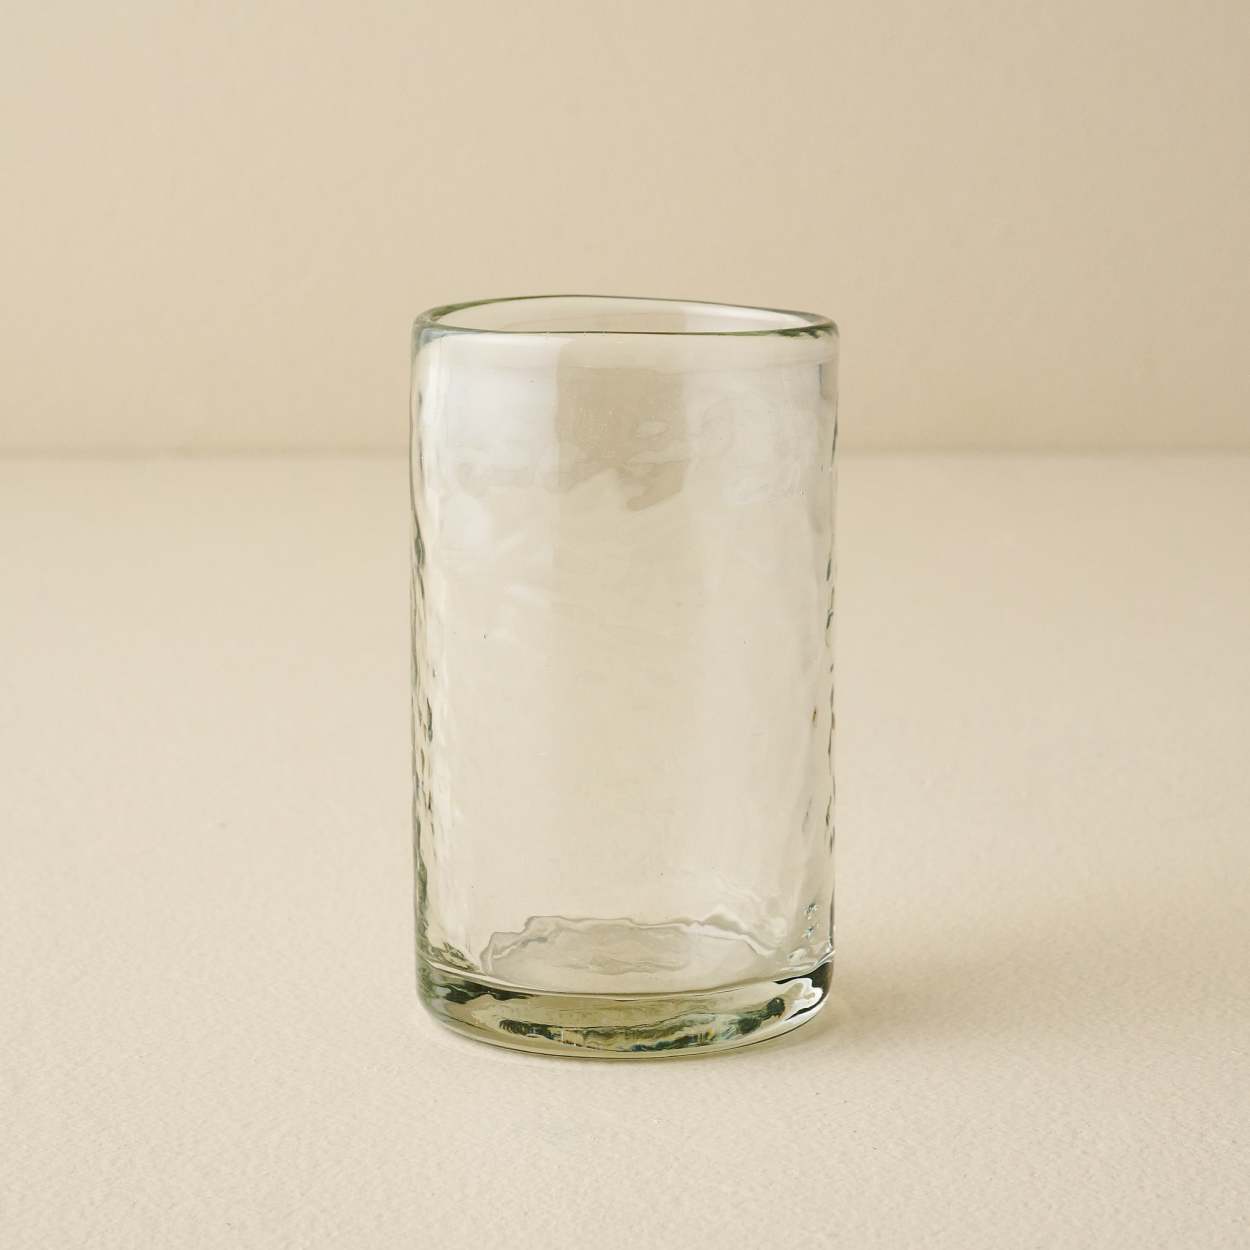 Home & Living :: Kitchen & Dining :: Drinkware :: Tumblers & Water